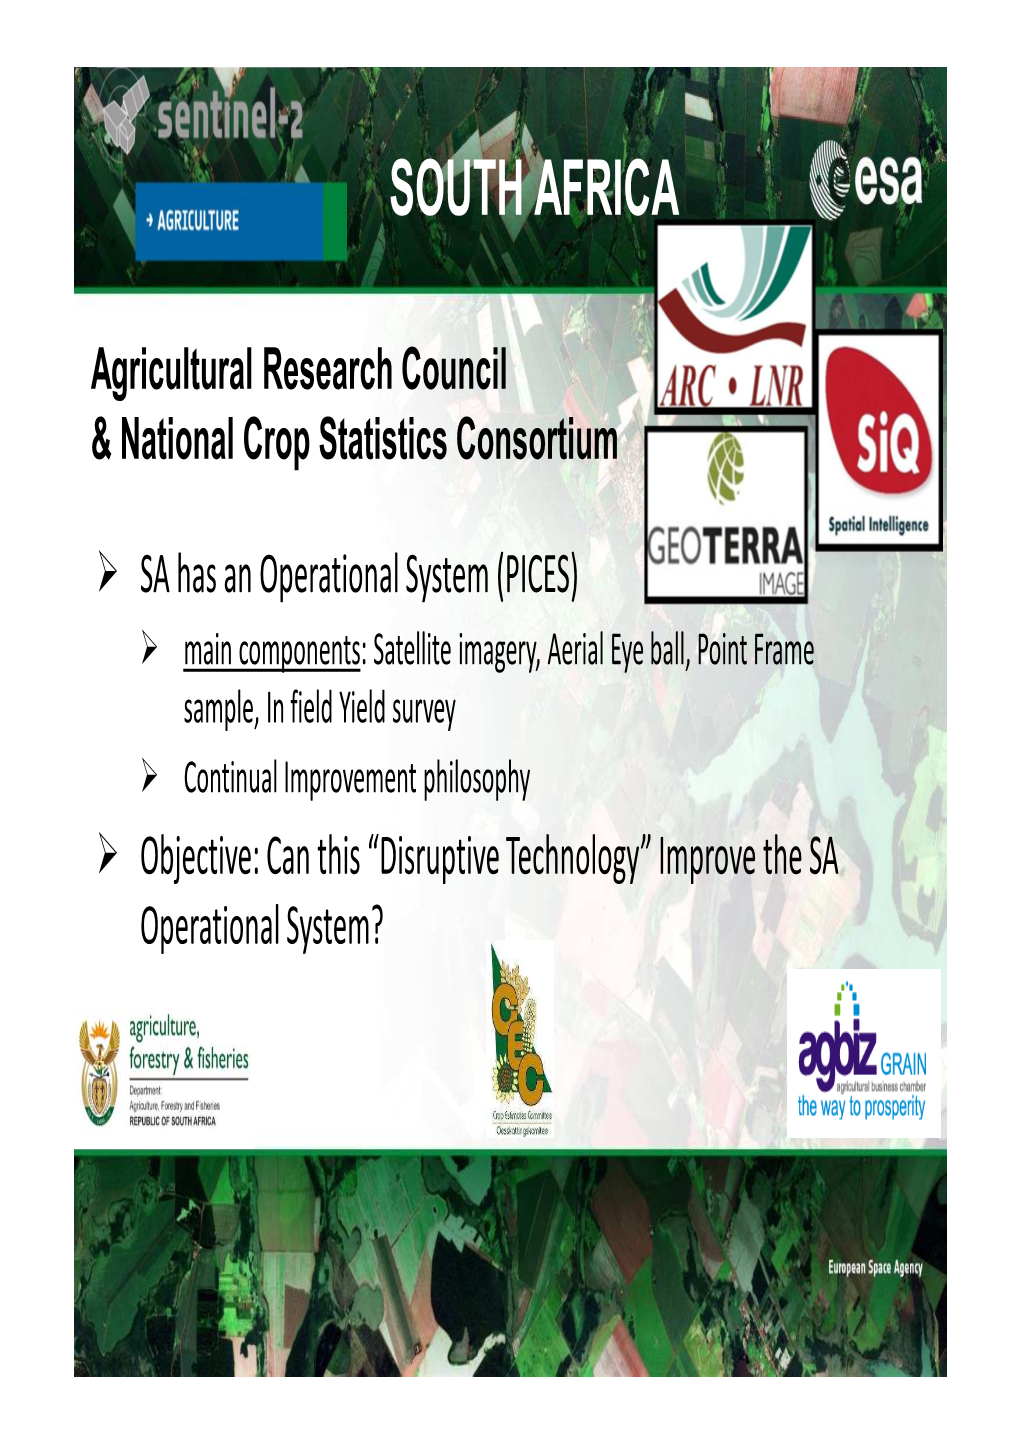 Nationwide Sen2agri Demonstration in South Africa